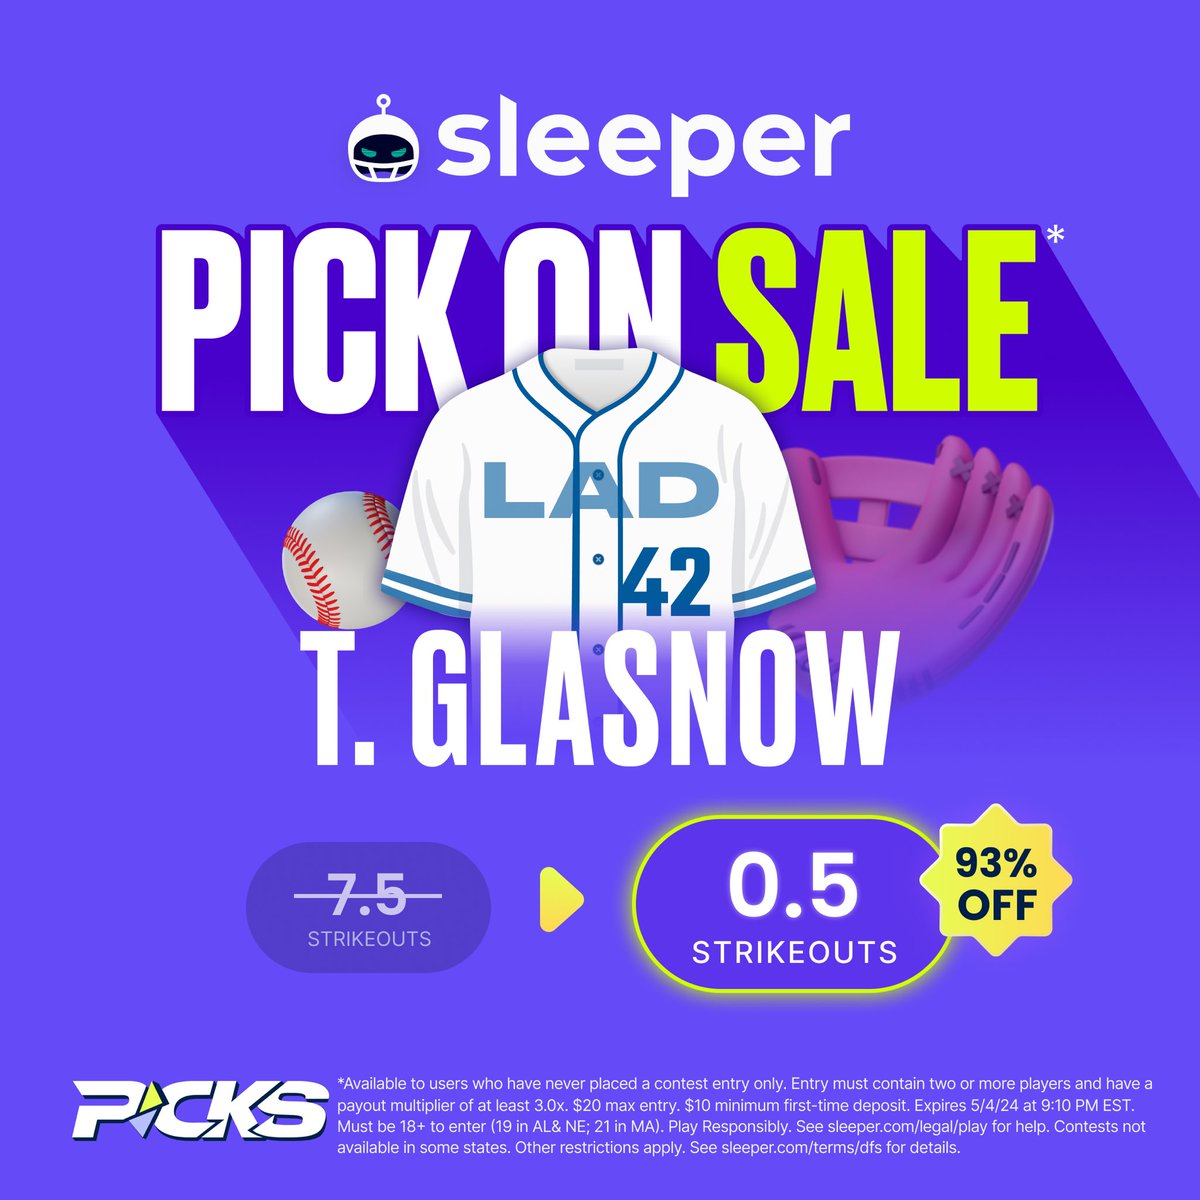 Sleeper has THREE HUGE Promos Today For New Users Luka Doncic Over 0.5 Points Anthony Edwards Over 0.5 Points Tyler Glasnow Over 0.5 Strikeouts Unlock them ALL by using⬇️ Code CARUSO for up to $500 Deposit Match sleeper.com/promo/CARUSO